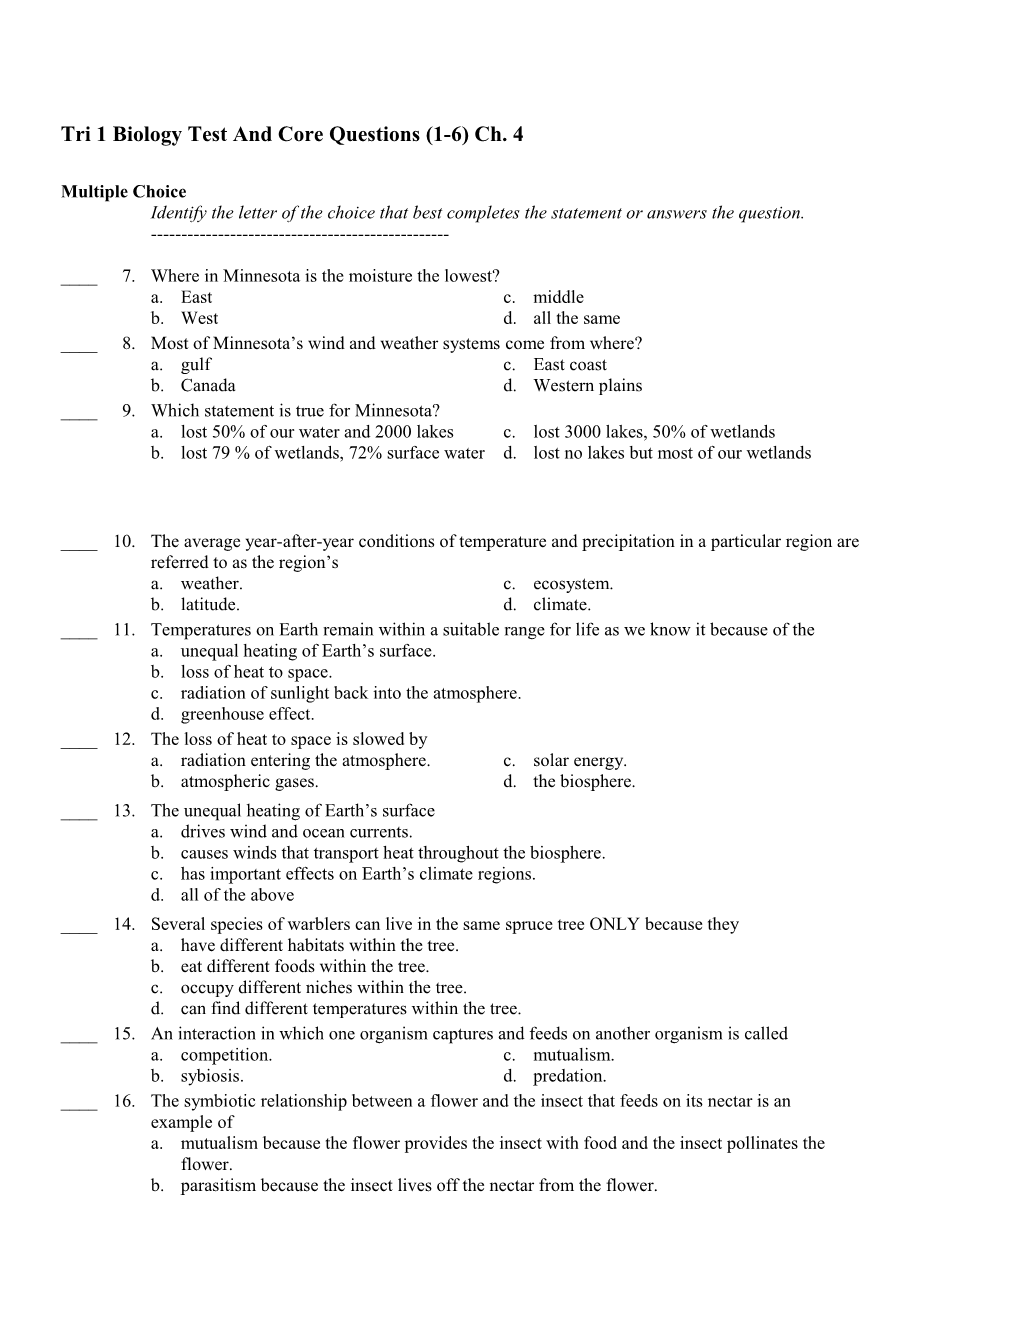 Tri 1 Biology Test and Core Questions (1-6) Ch